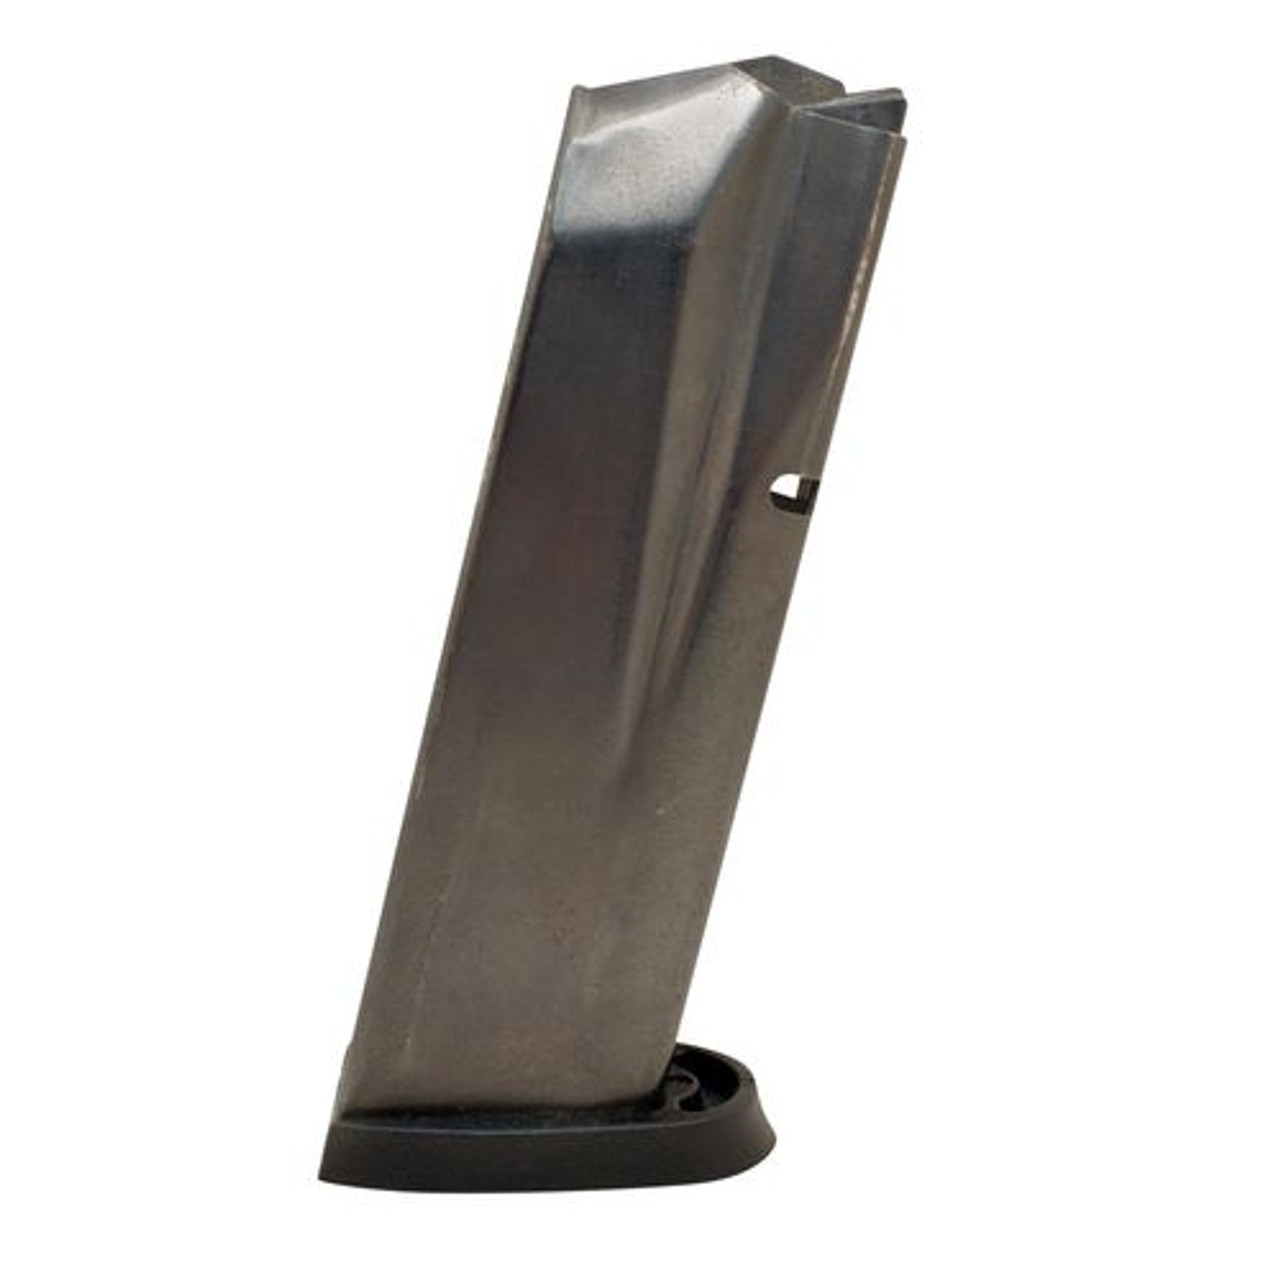 The Smith & Wesson M&P45 magazine is a standard factory replacement magazine. This magazine is for M&P full size models chambered in .45 Auto and holds 10 rounds of ammunition. It is made of stainless steel and is made to Smith & Wesson's specifications and tolerances, using the same manufacturing and materials as the original equipment magazines, ensuring perfect fit and operation.

Features and Specifications:
Manufacturer Number: 194690000
S&W Factory Magazine
Caliber: .45 ACP
Capacity: 10 Rounds
Body Material: Steel
Spring Material: Steel
Follower Material: Polymer
Baseplate Material: Polymer
Finish: Black

Fits:
Smith & Wesson M&P45
